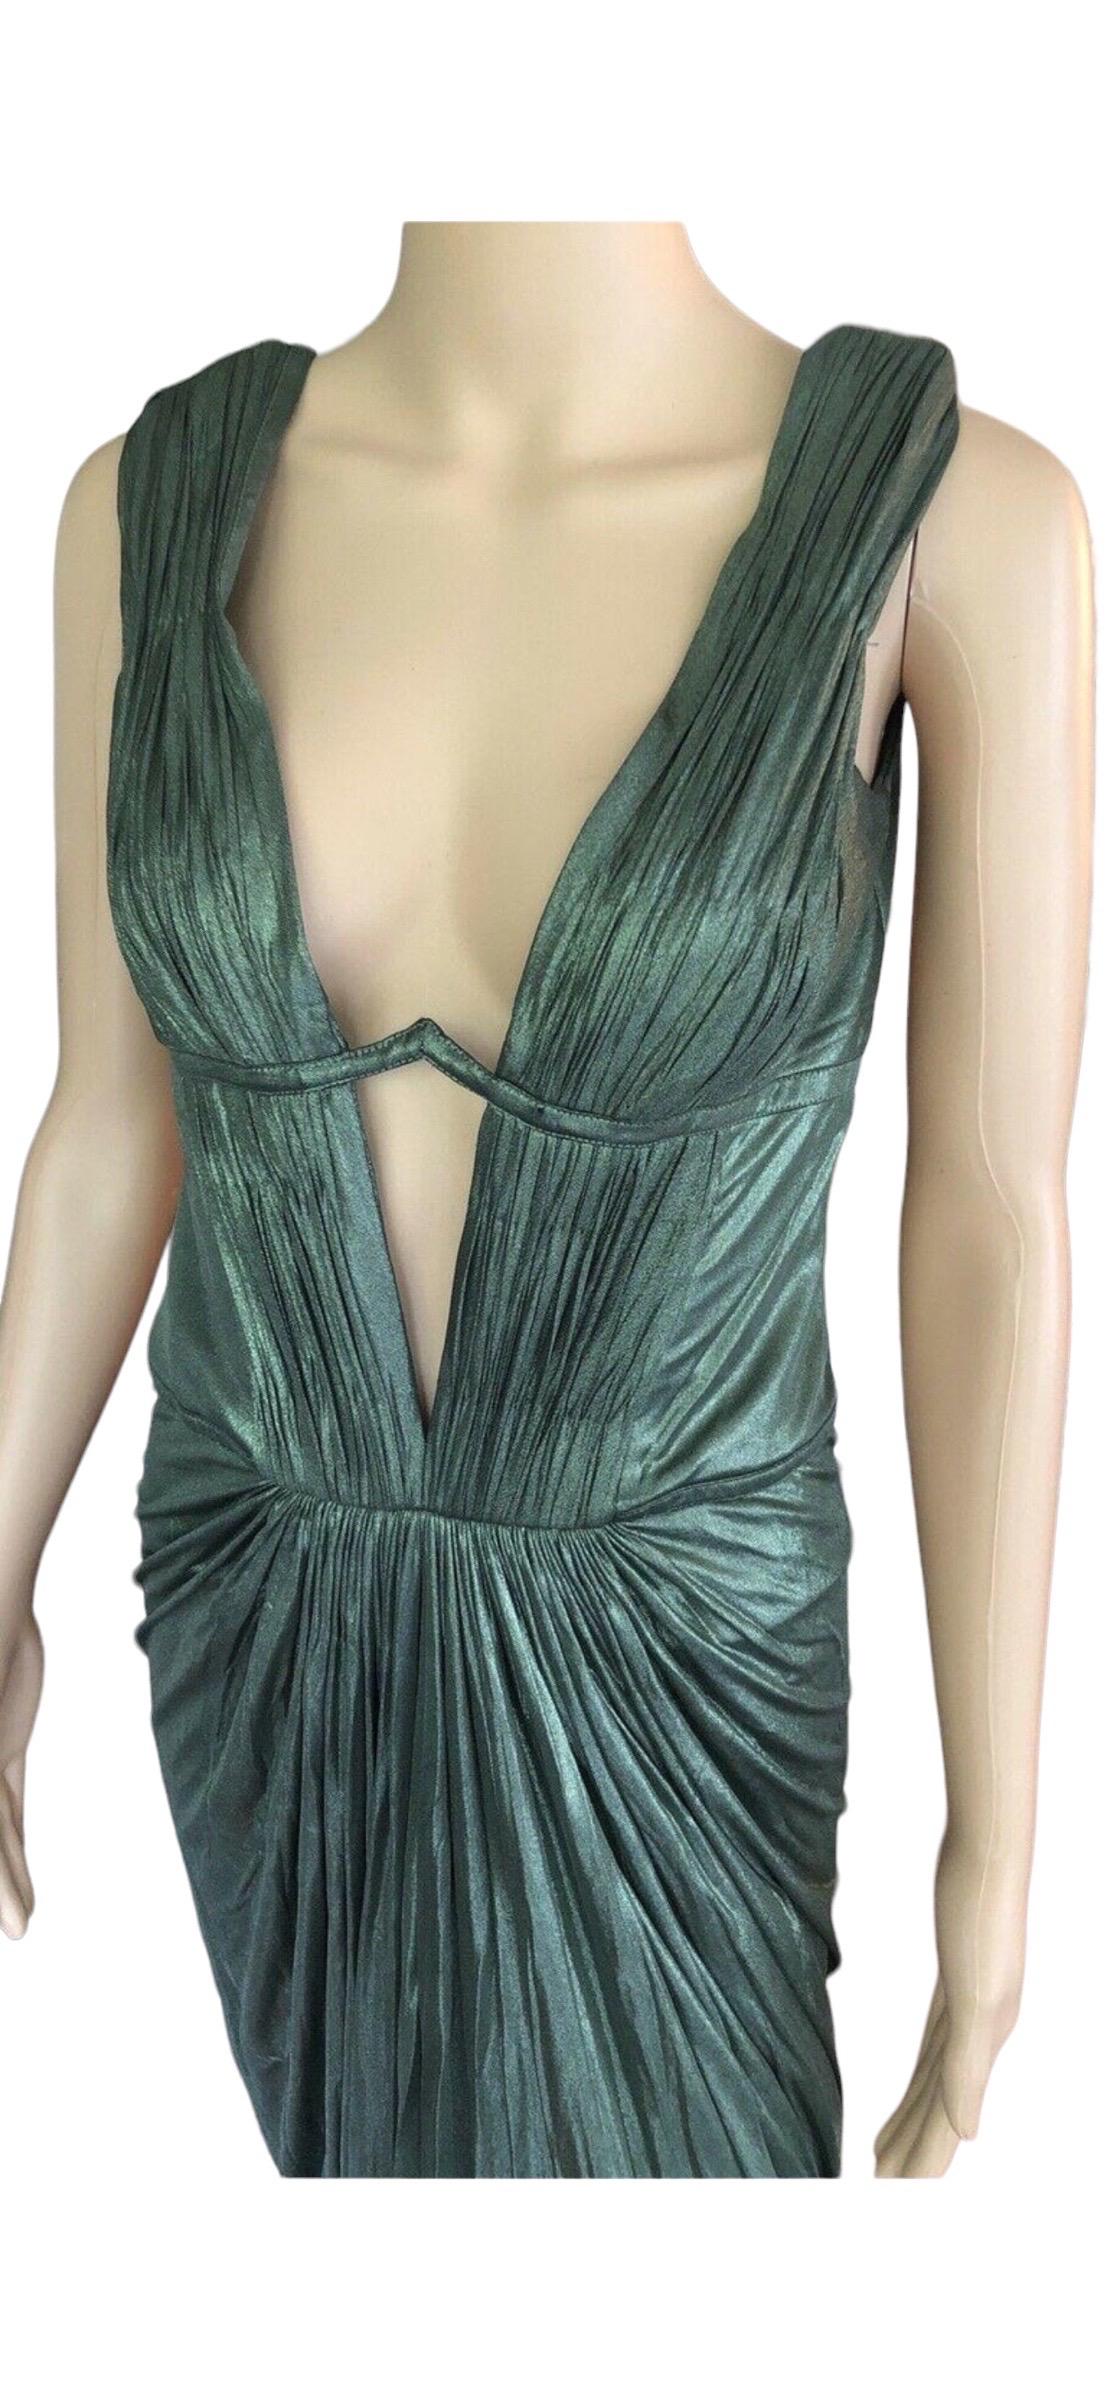 Roberto Cavalli F/W 2007 Runway Sexy Plunging Neckline Open Back Dress Gown IT 44

Look 43 from the Fall 2007 Collection. Roberto Cavalli green metallic evening dress featuring gathering on the bodice, pleats throughout, deep plunging neckline,